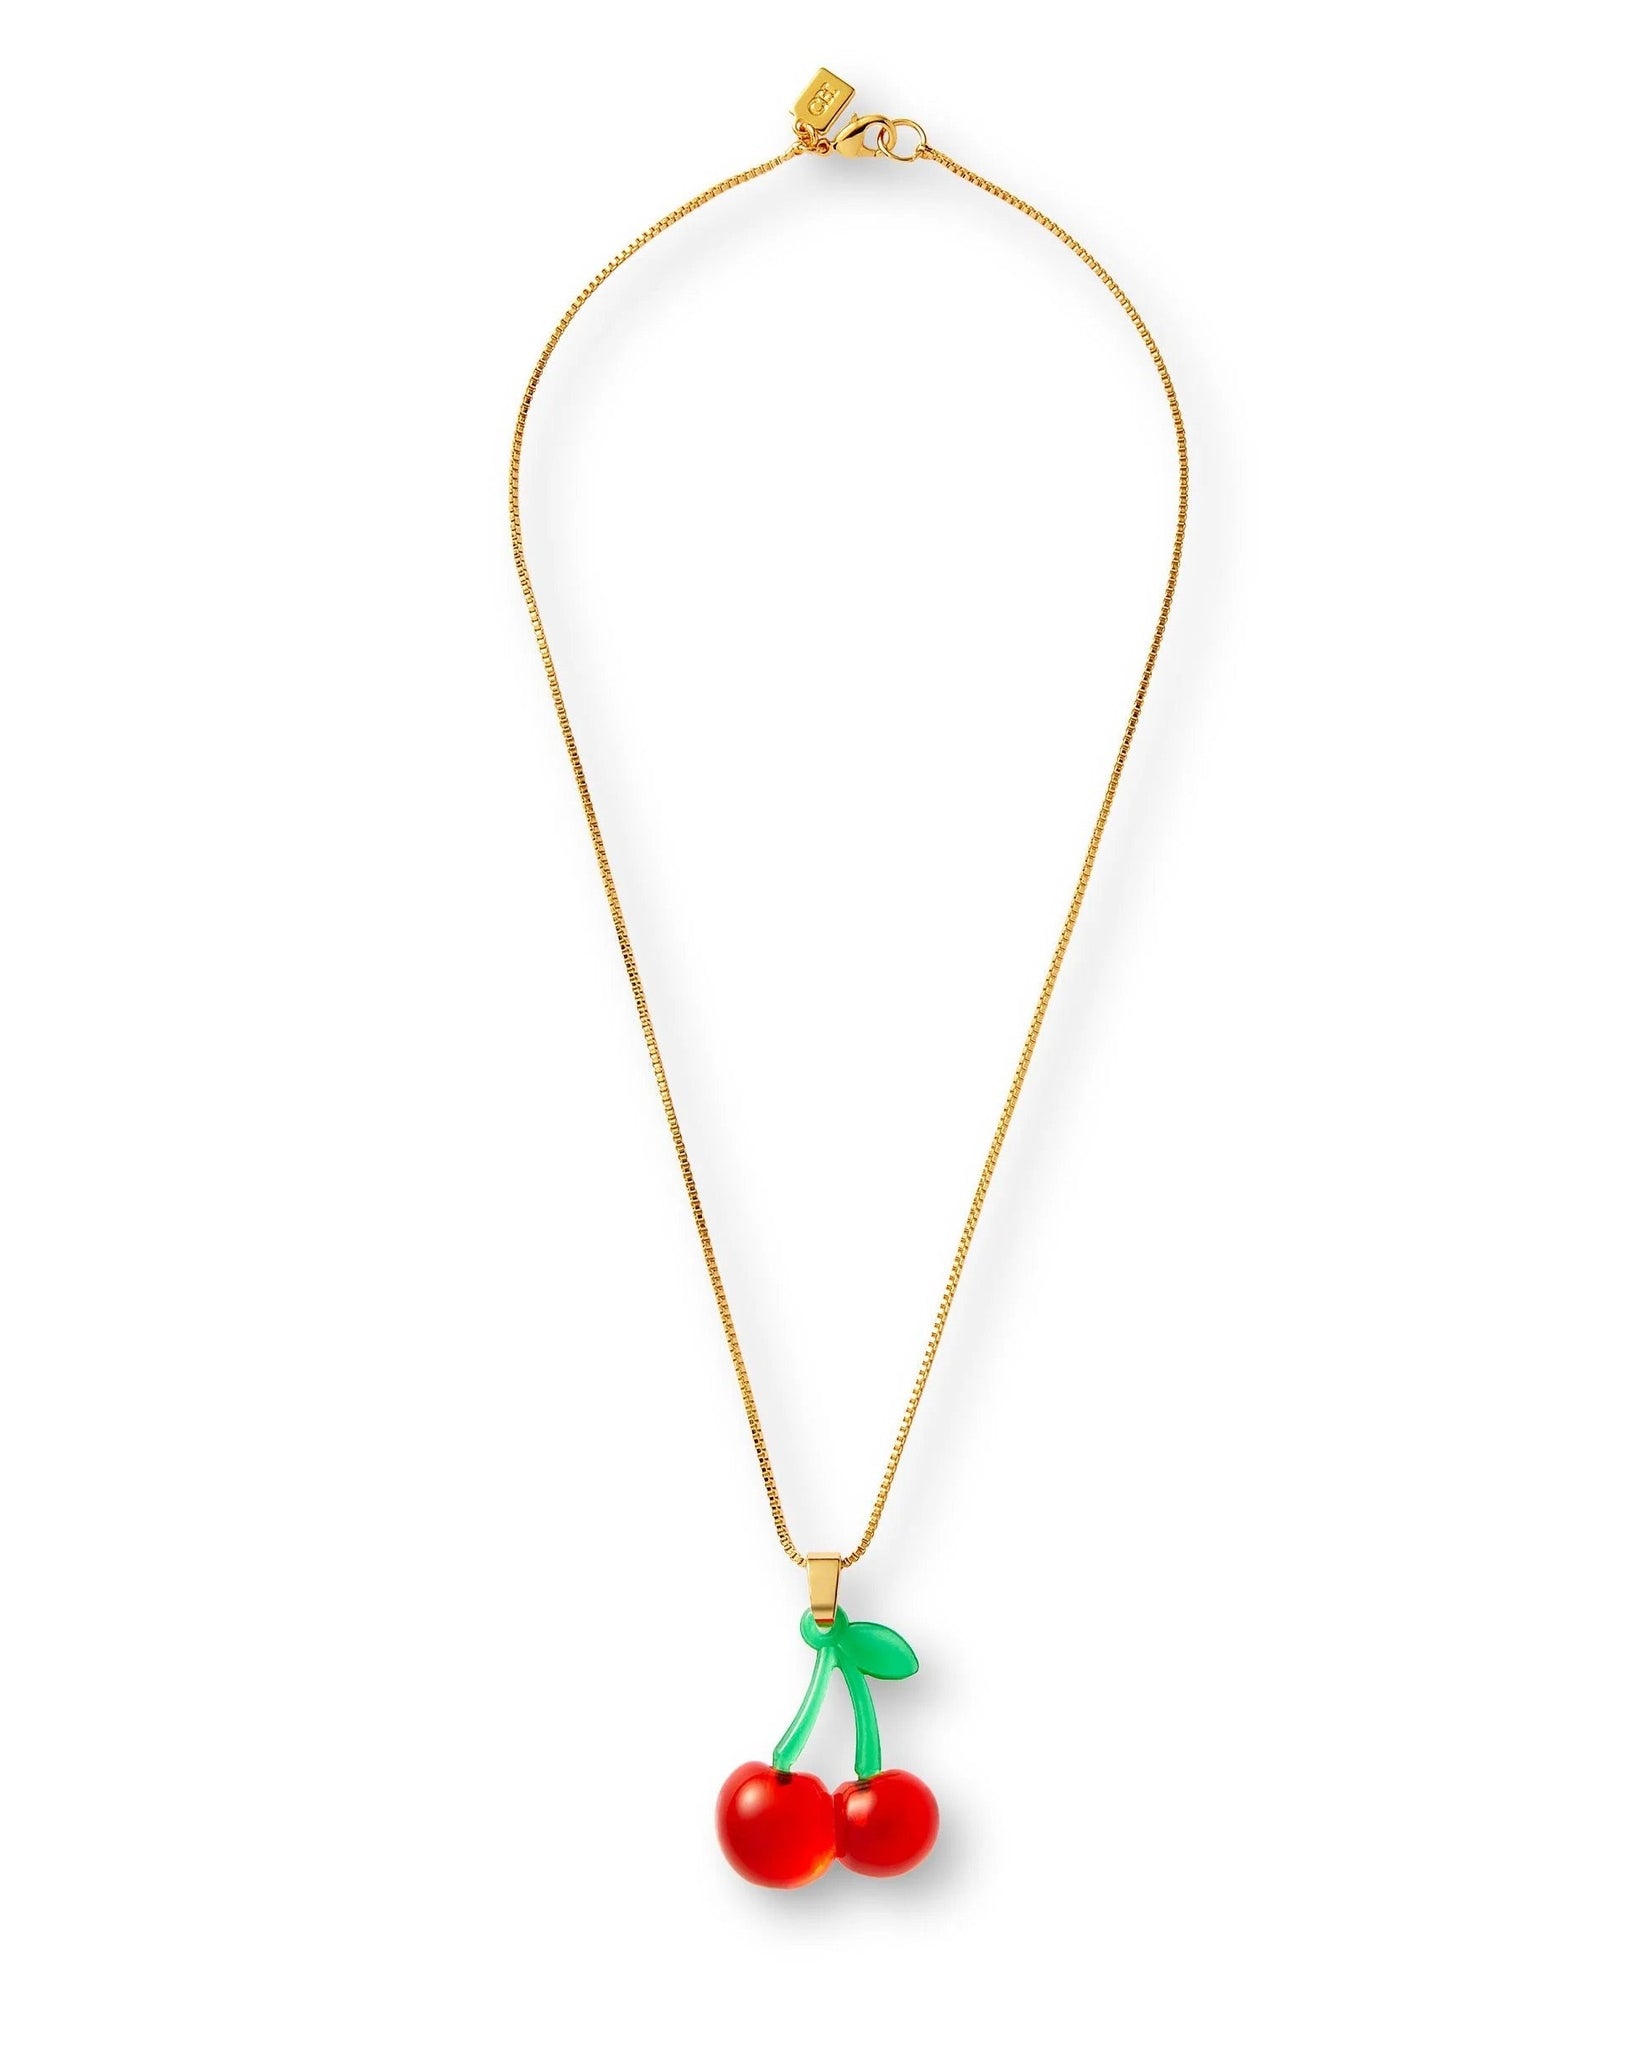 Pop the Cherry necklace by Crystal Haze